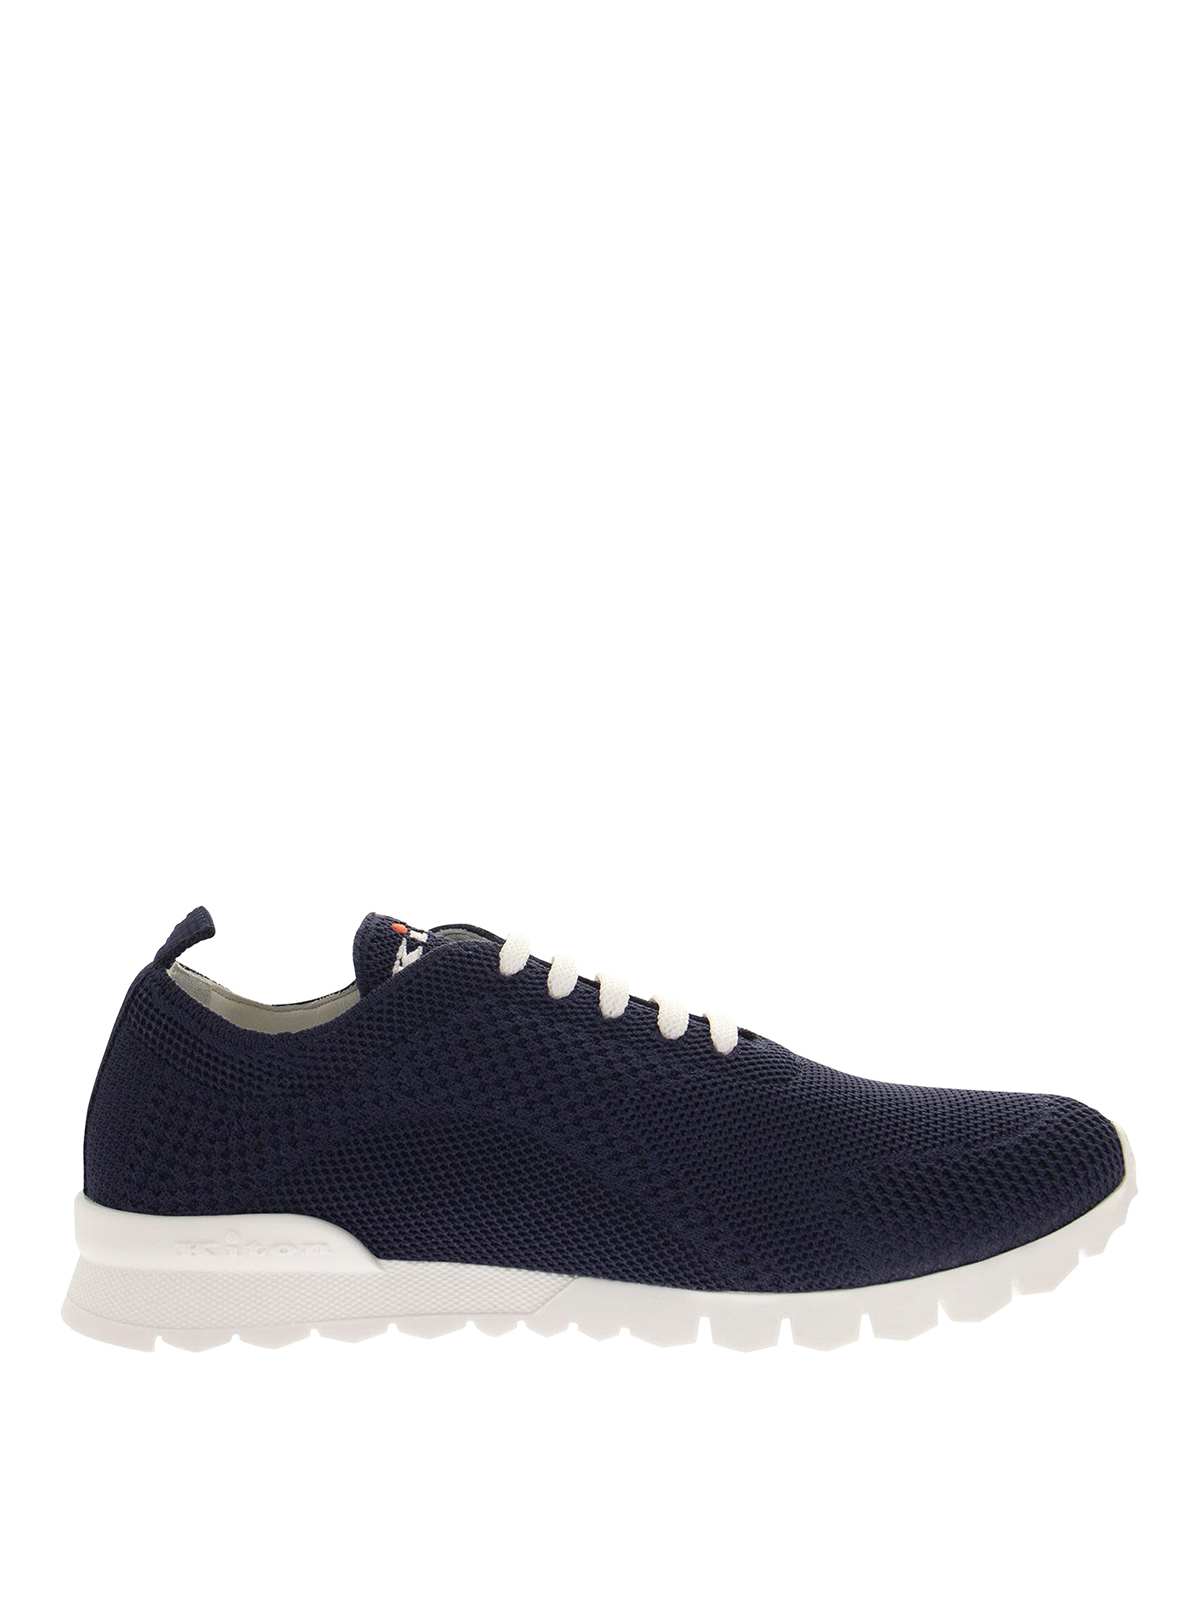 Trainers Kiton - Knitted stretch cotton sneakers - USSFITSN008090201W